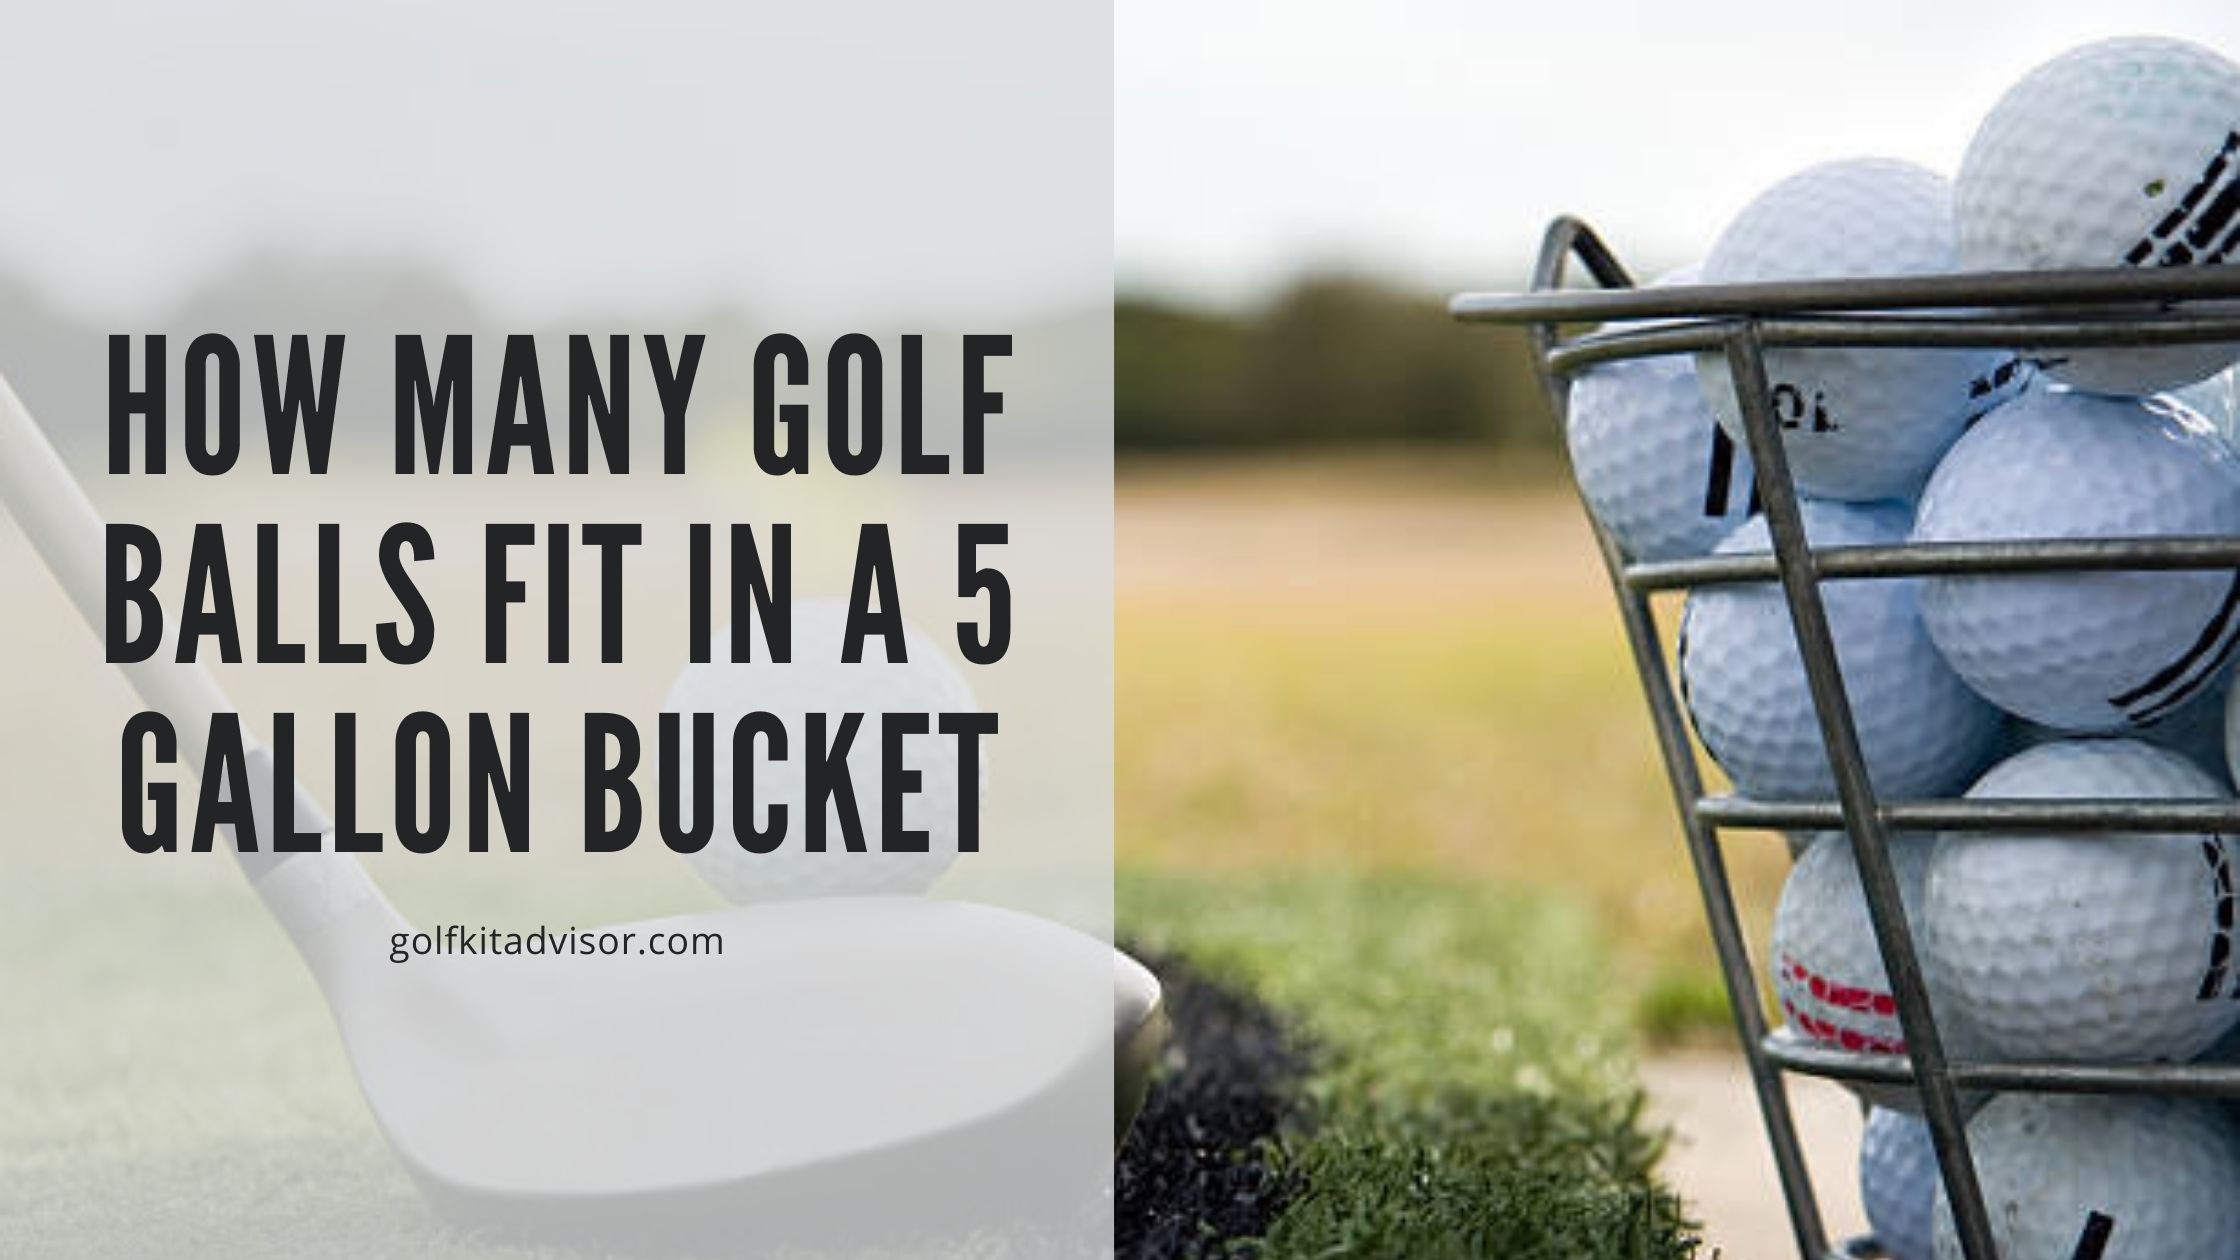 How Many Golf Balls Fit in a 5 Gallon Bucket